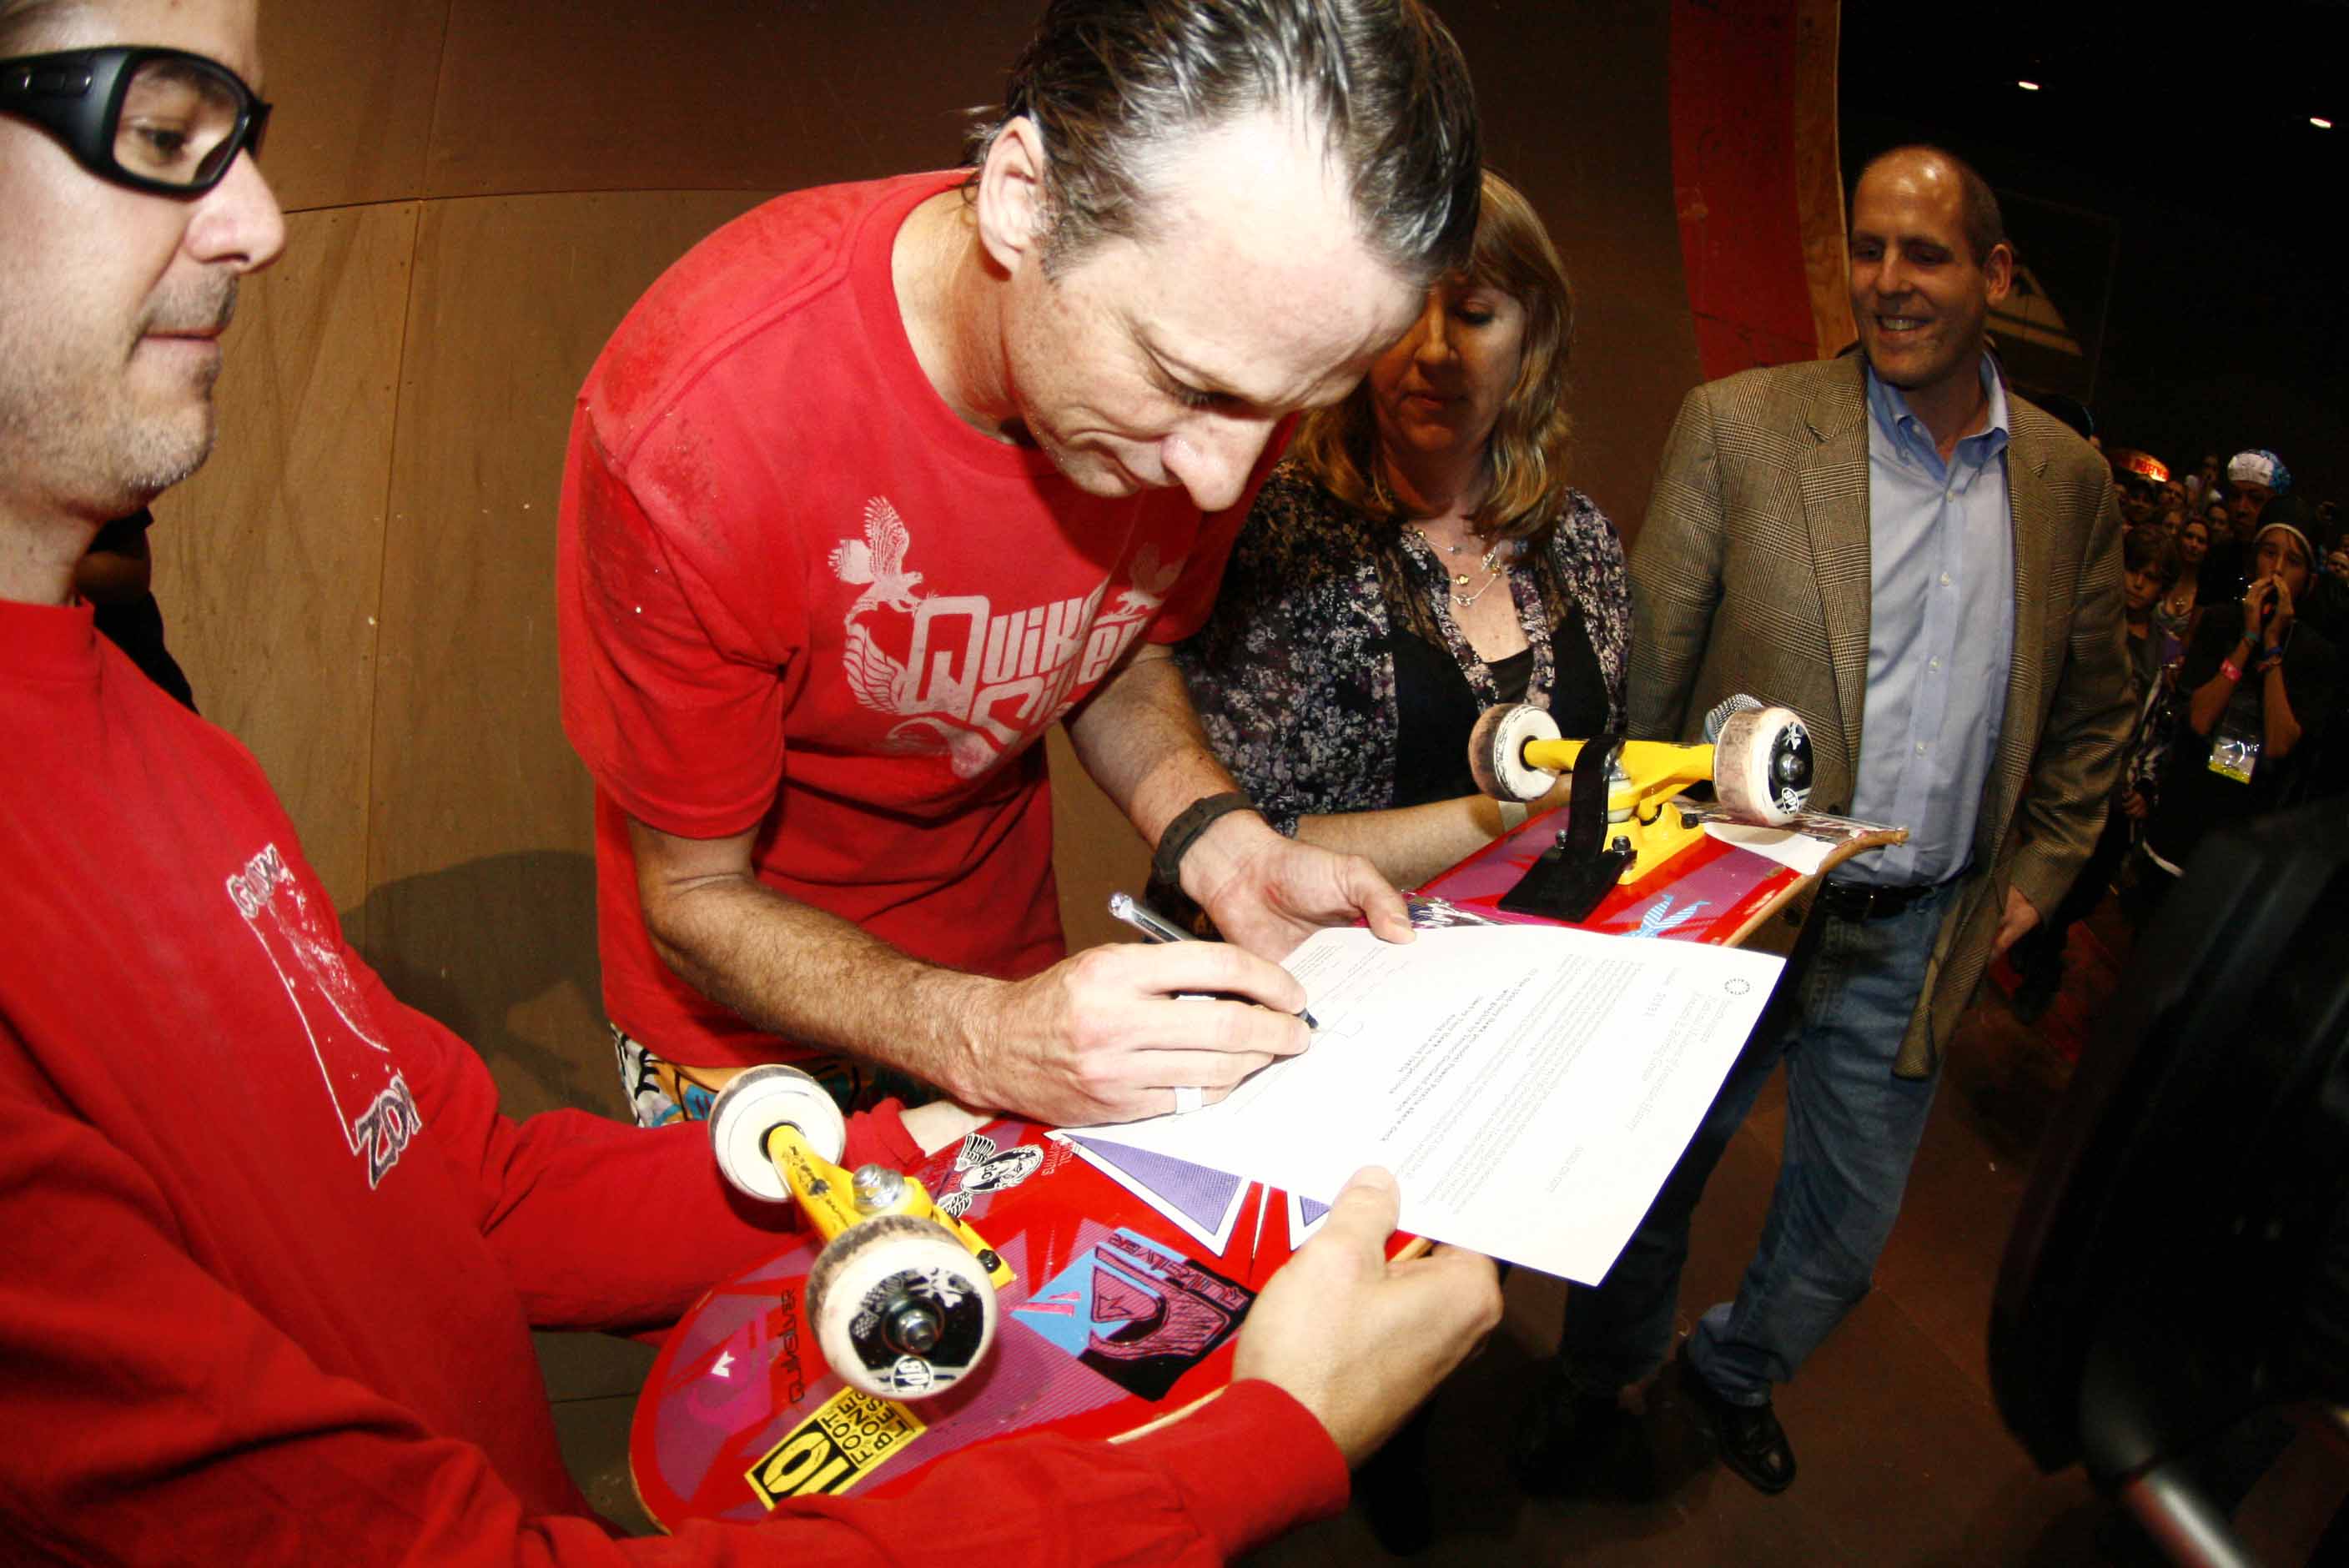 Tony Hawk signs deed of gift while on skate ramp